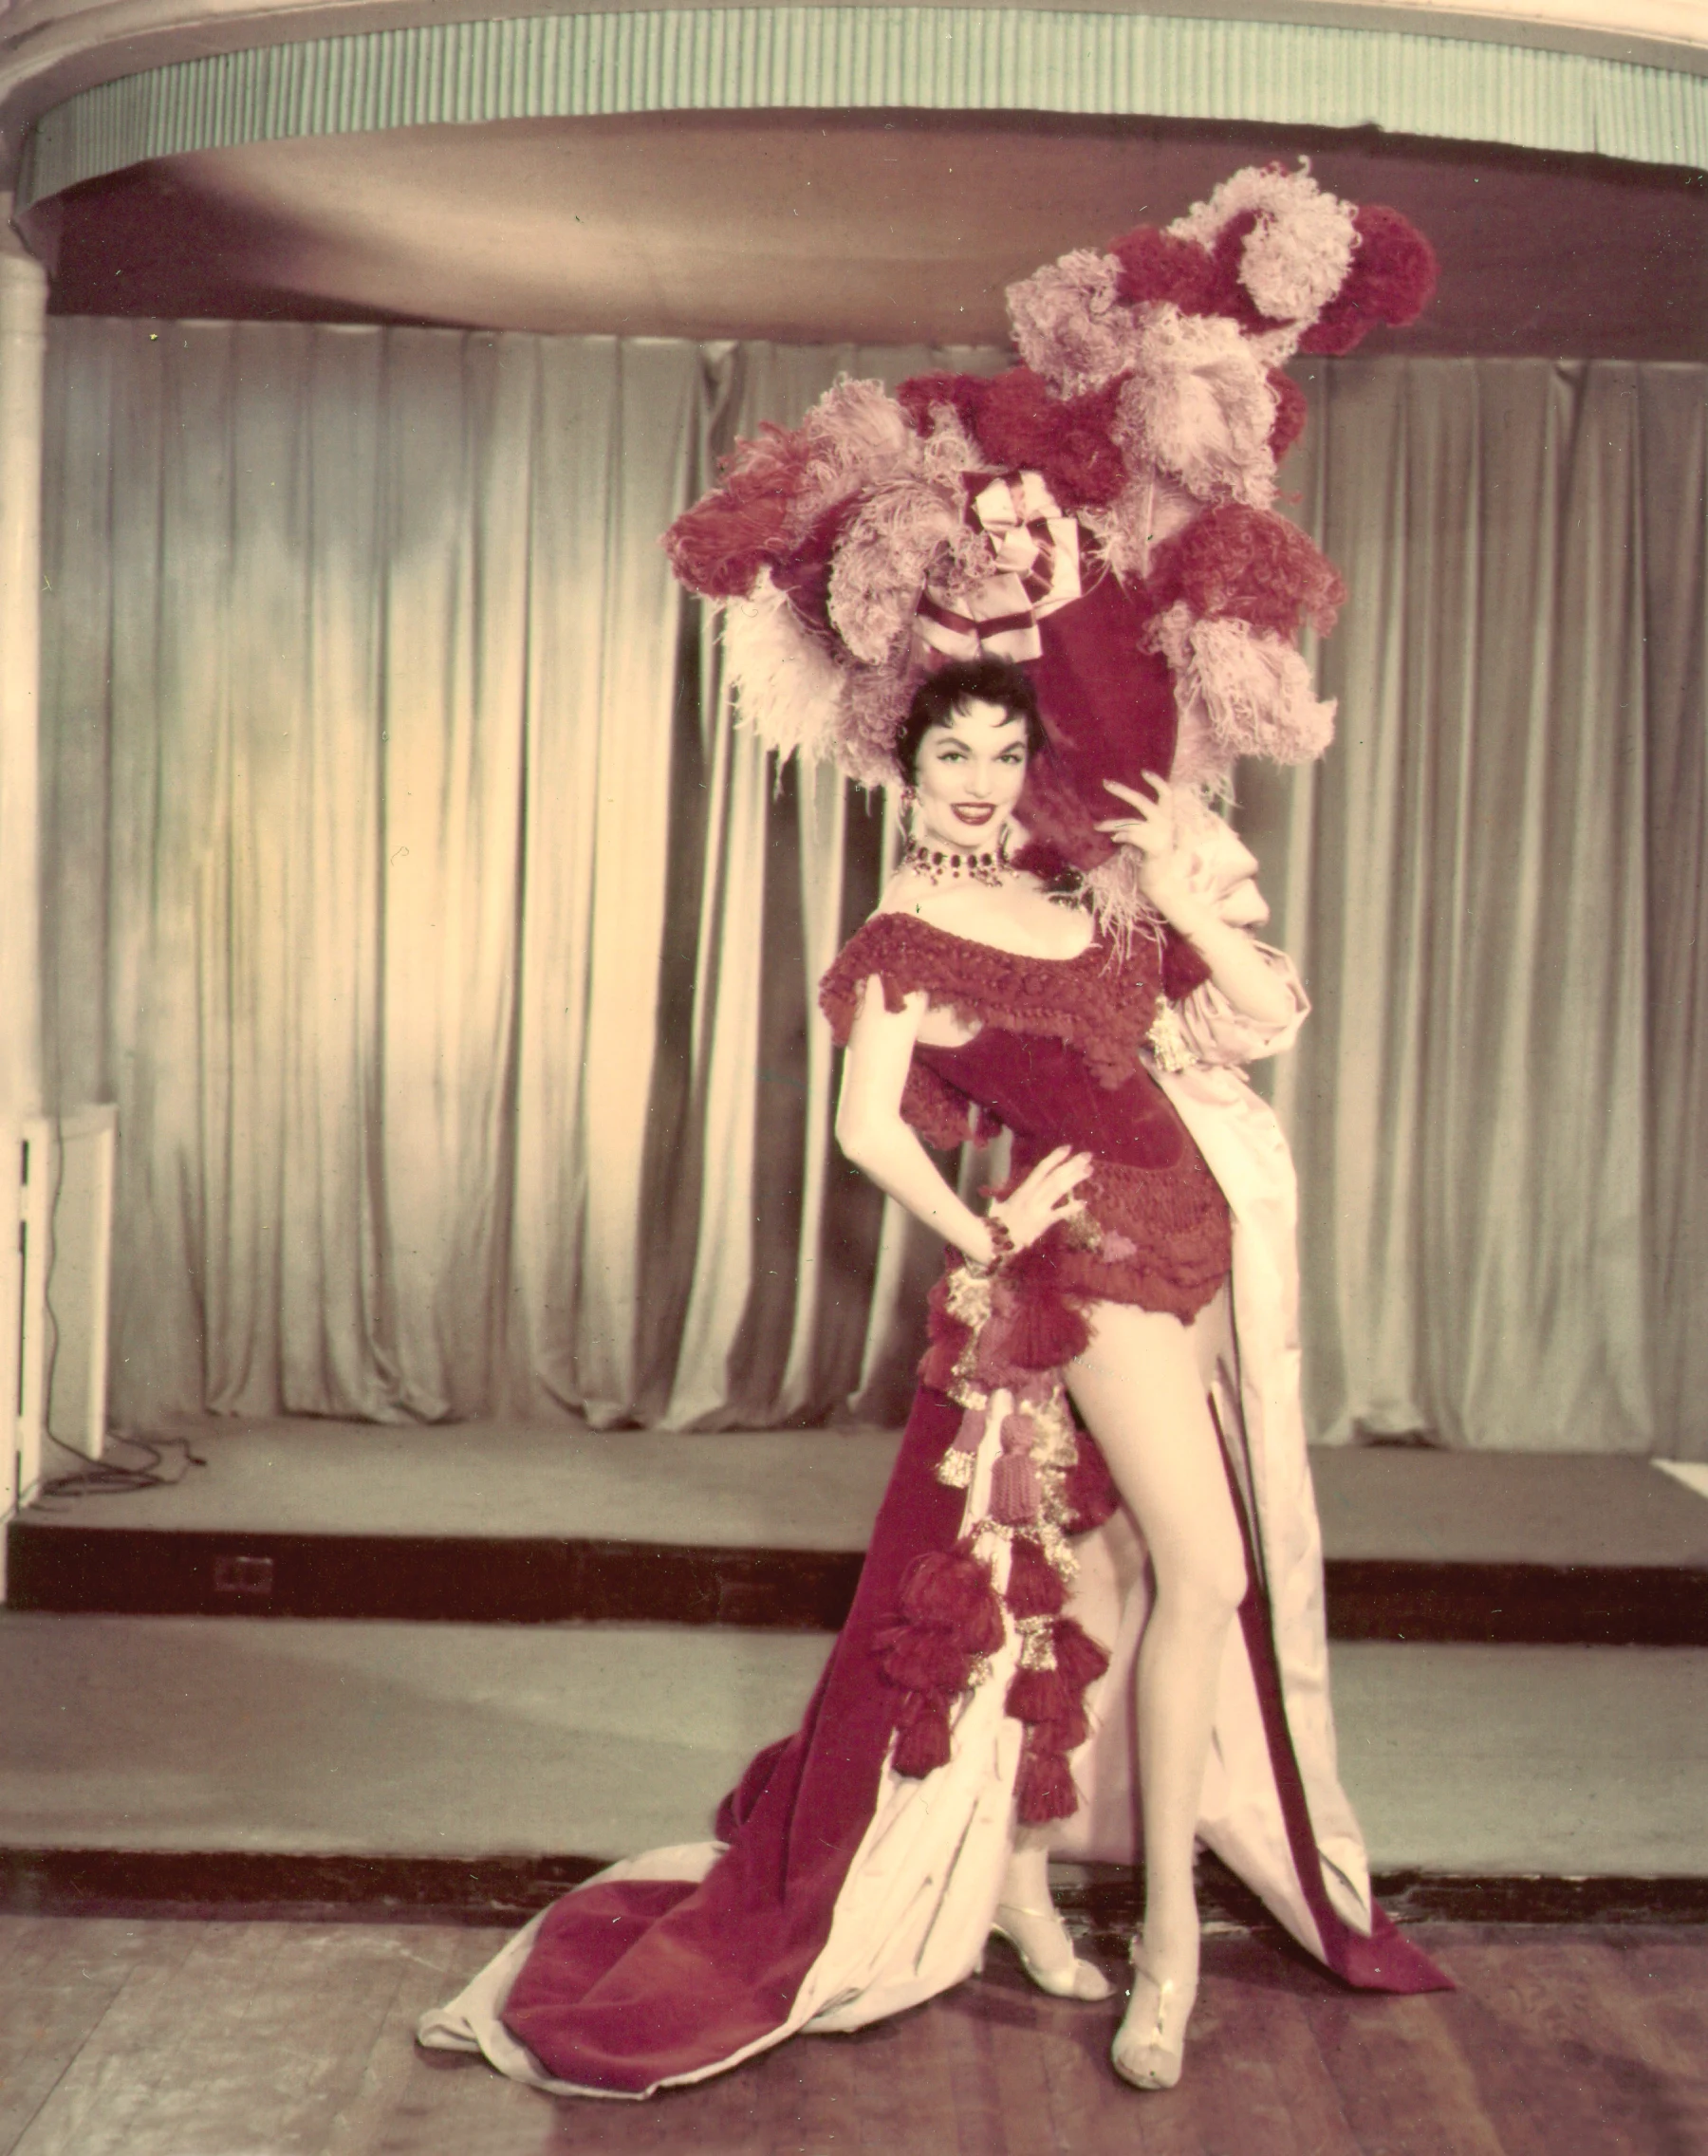 Unfurling my dad’s lengthy legs (I always wished I’d inherited Mom’s) beneath an explosion of feathers during the revival of The Ziegfeld Follies.  No acting required, but who cared? It was Broadway!